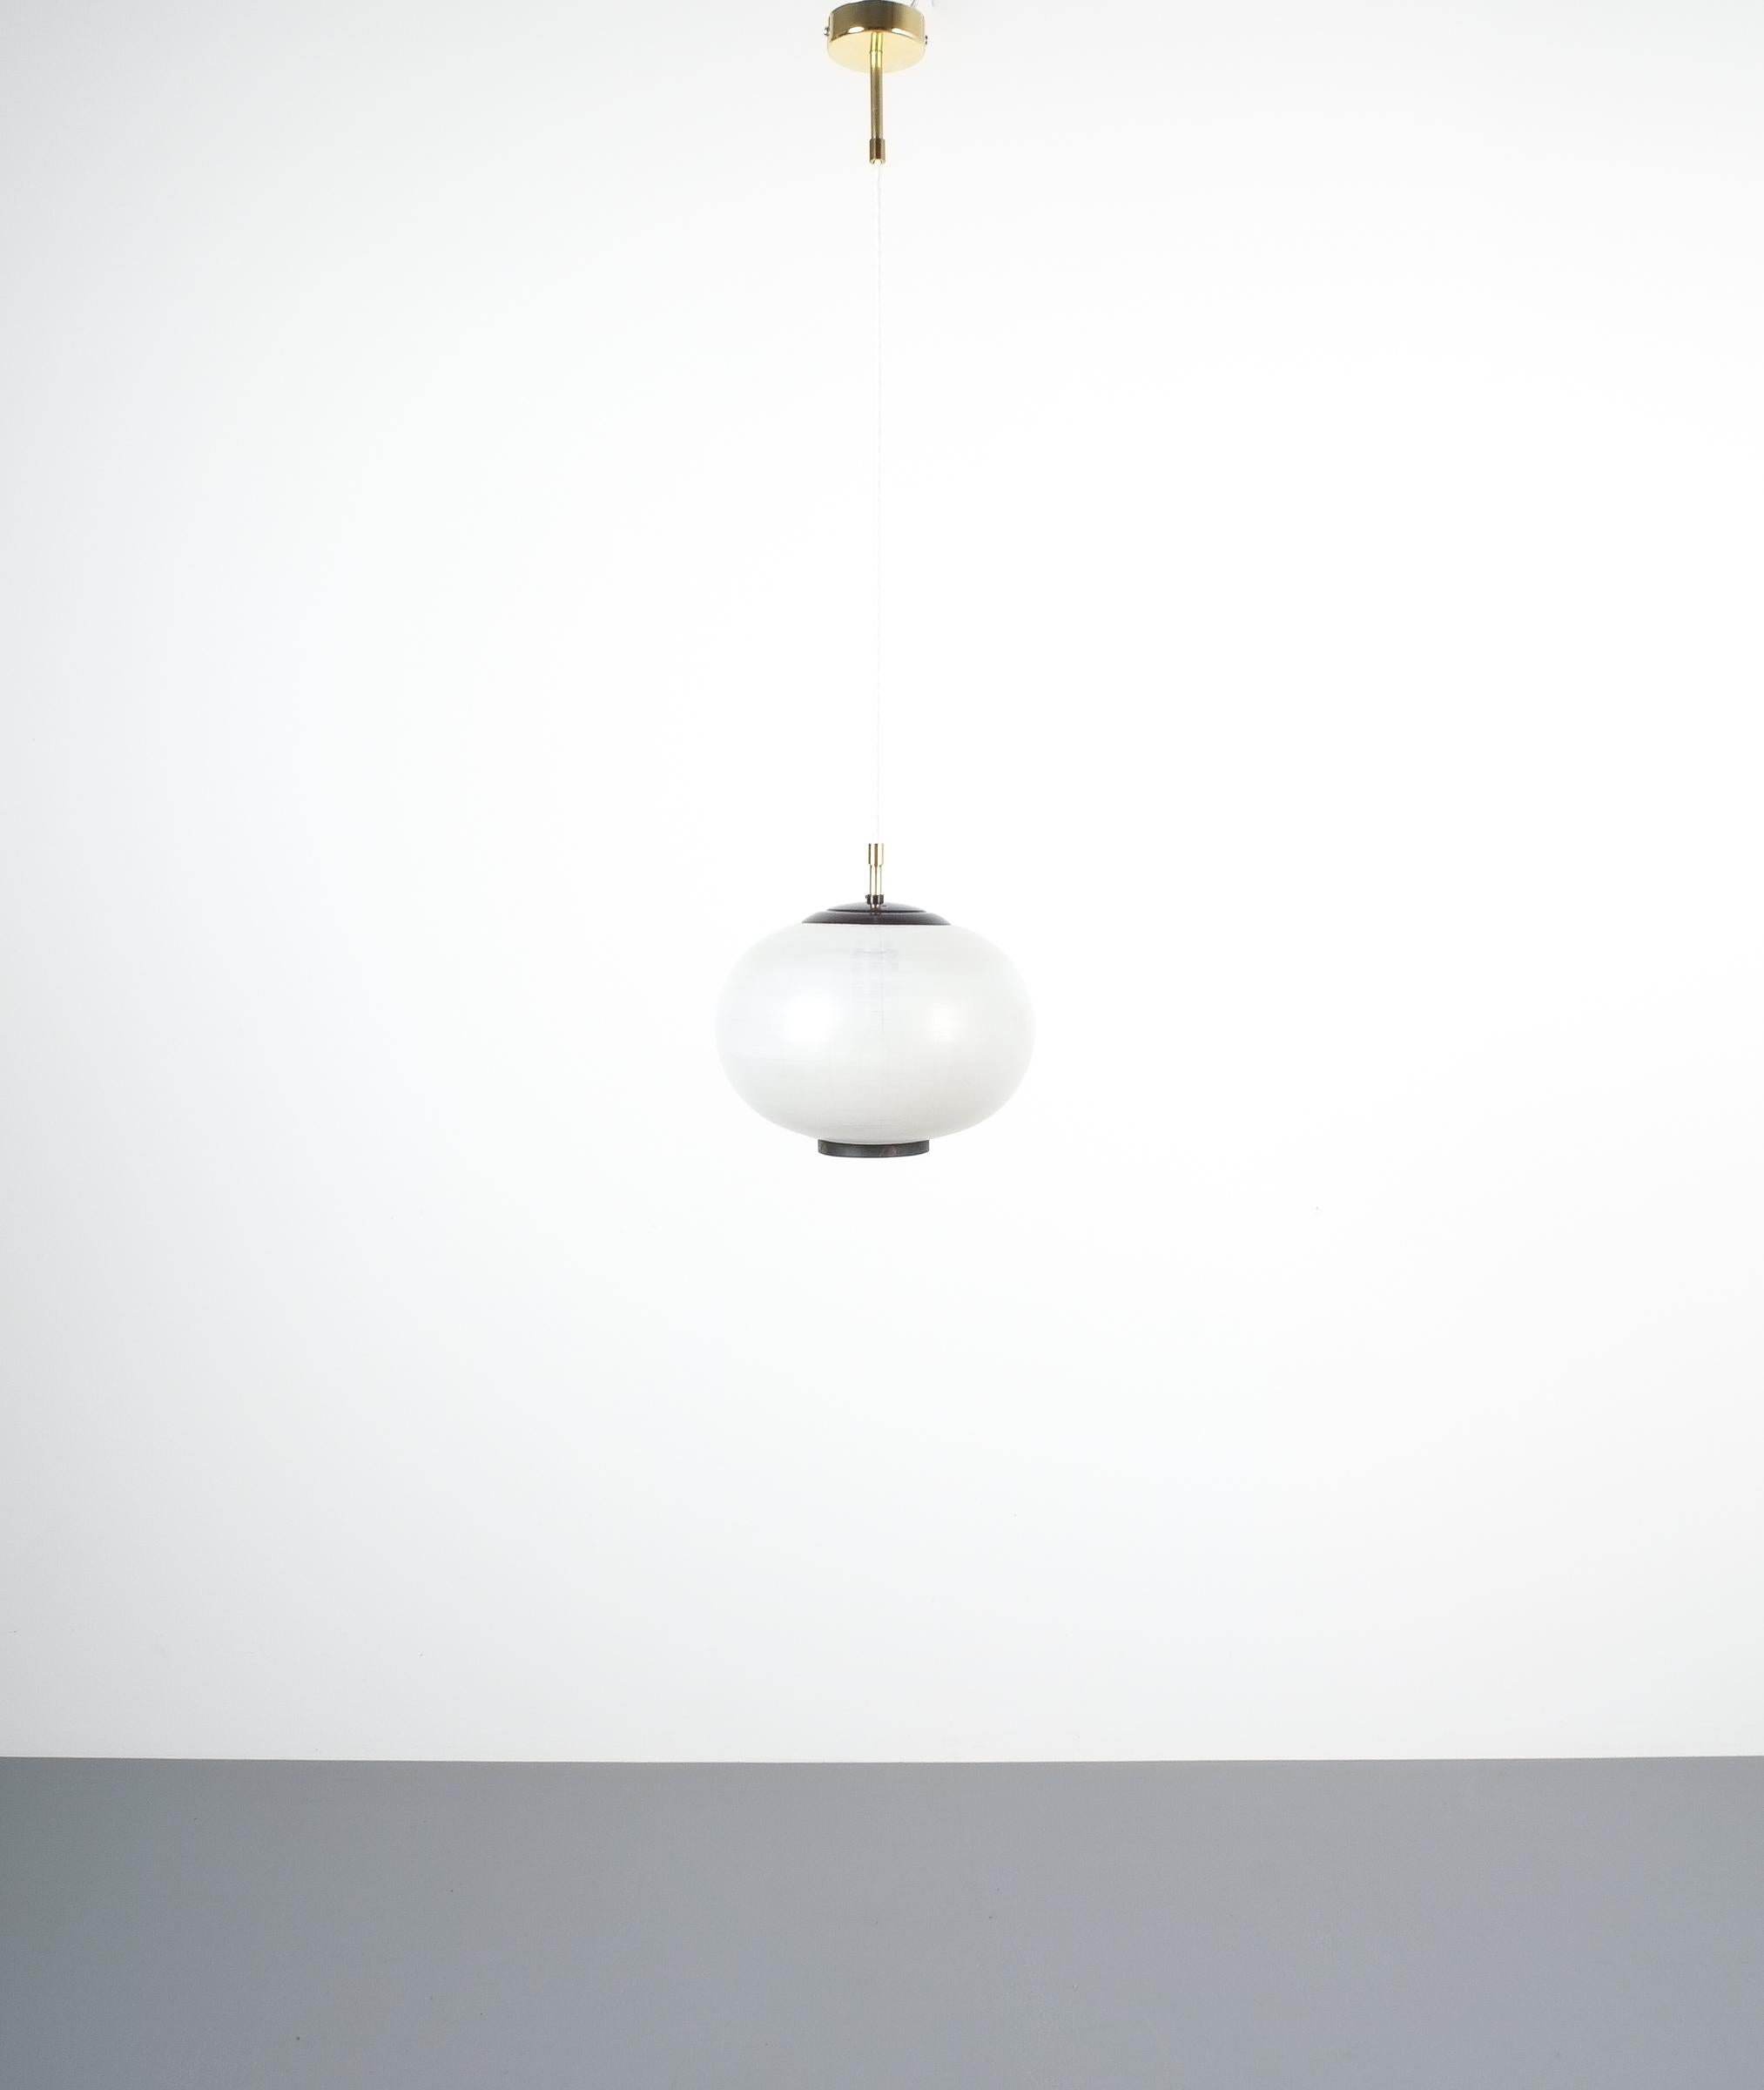 Satin glass and brass pendant lamp by Stilnovo, Italy, 1950. Elegant suspension pendant lamp with stripped satin white glass and black metal paint accents. We have rewired this piece and facilitated with new white cord cables and new modern canopy.